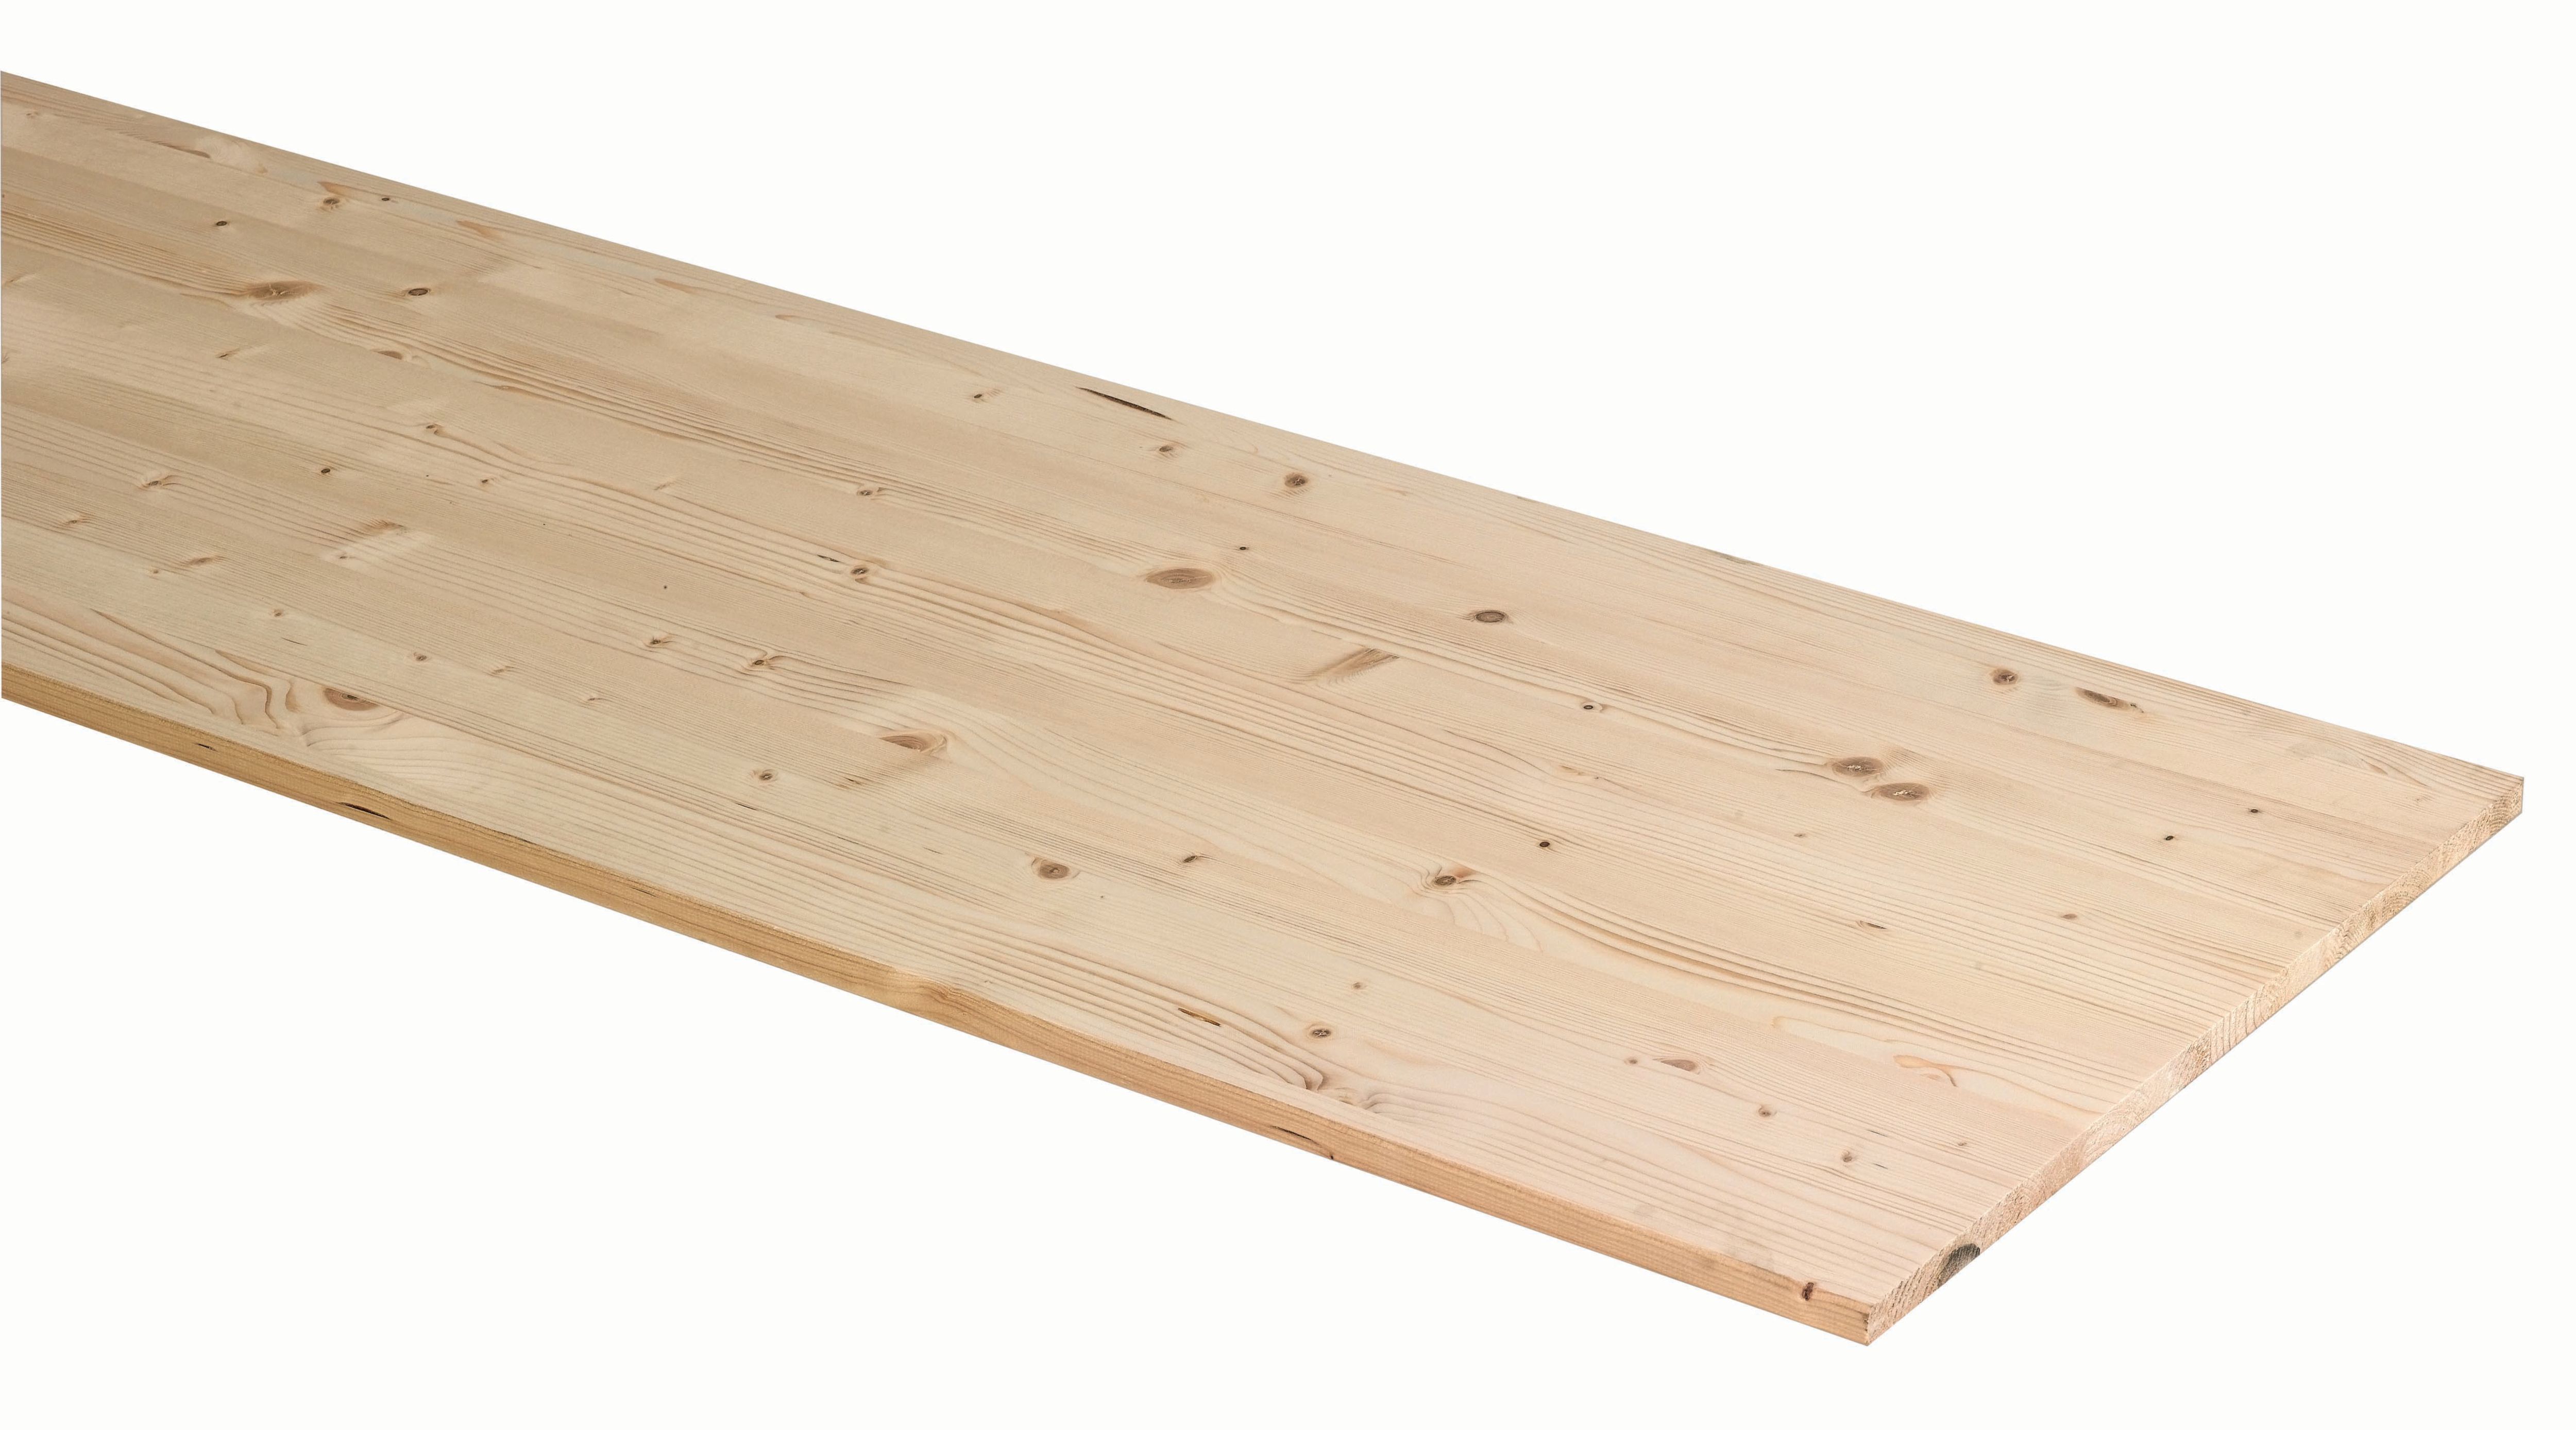 Image of Wickes General Purpose Spruce Timberboard - 18mm x 400mm x 2350mm